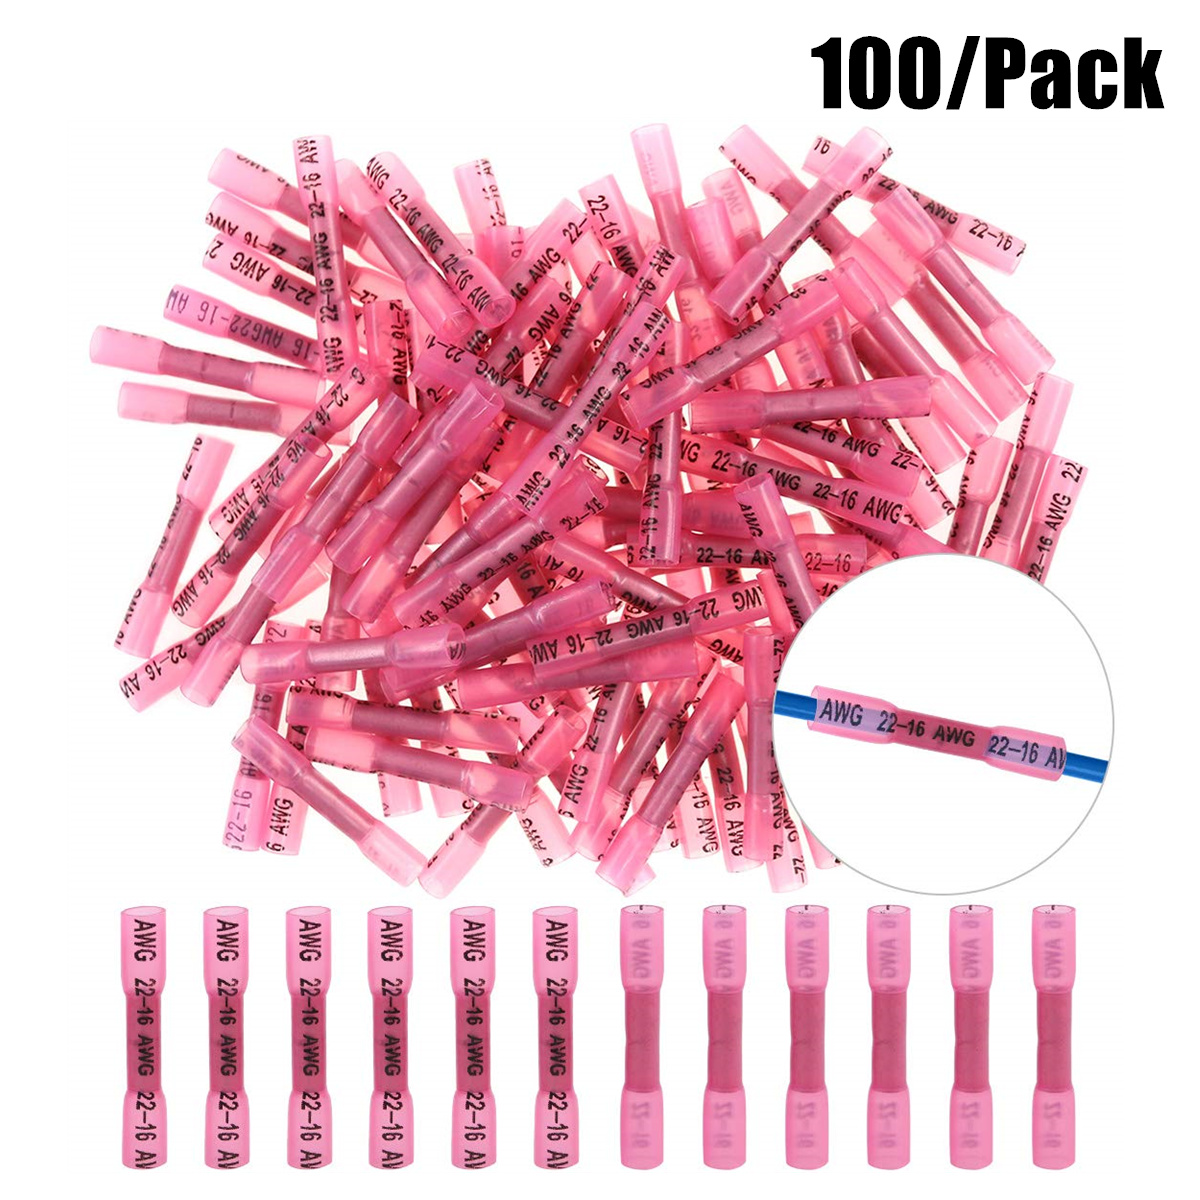 100PCS Red 22-16AWG Heat Shrink Wire Connectors Butt Splice Waterproof Terminals 